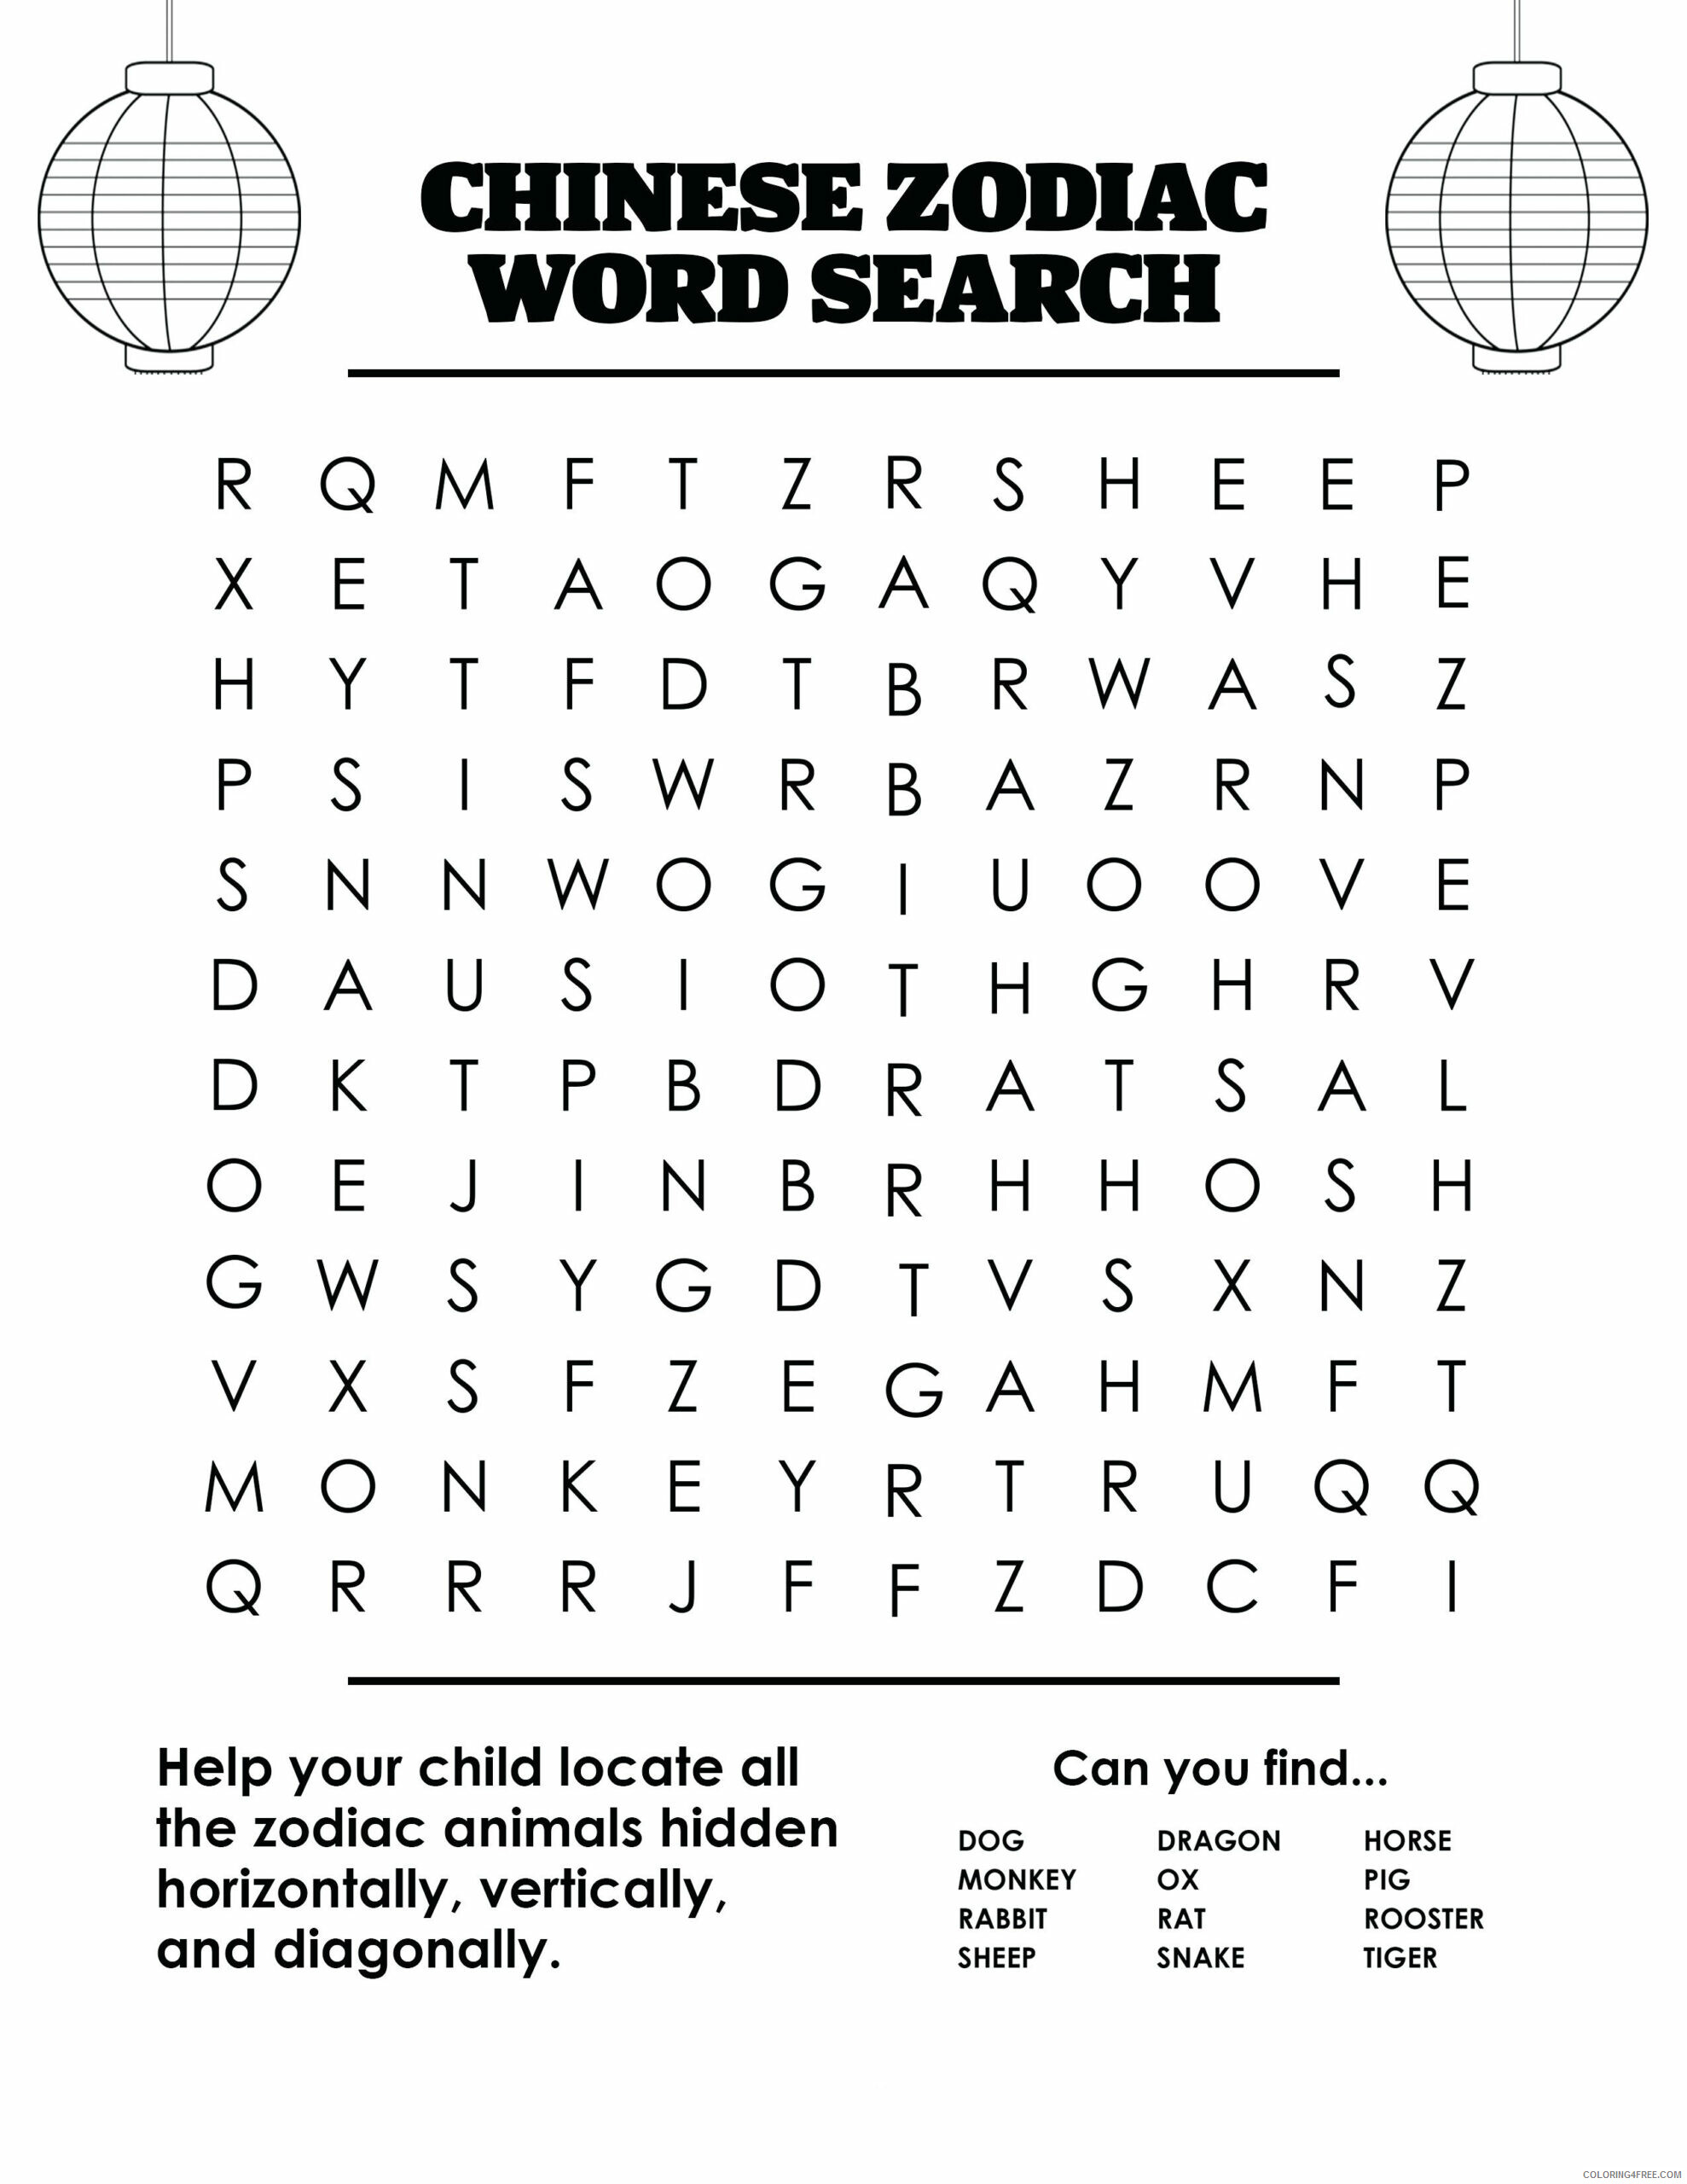 2nd Grade Coloring Pages Educational Chinese Zodiac Word Search 2020 0108 Coloring4free